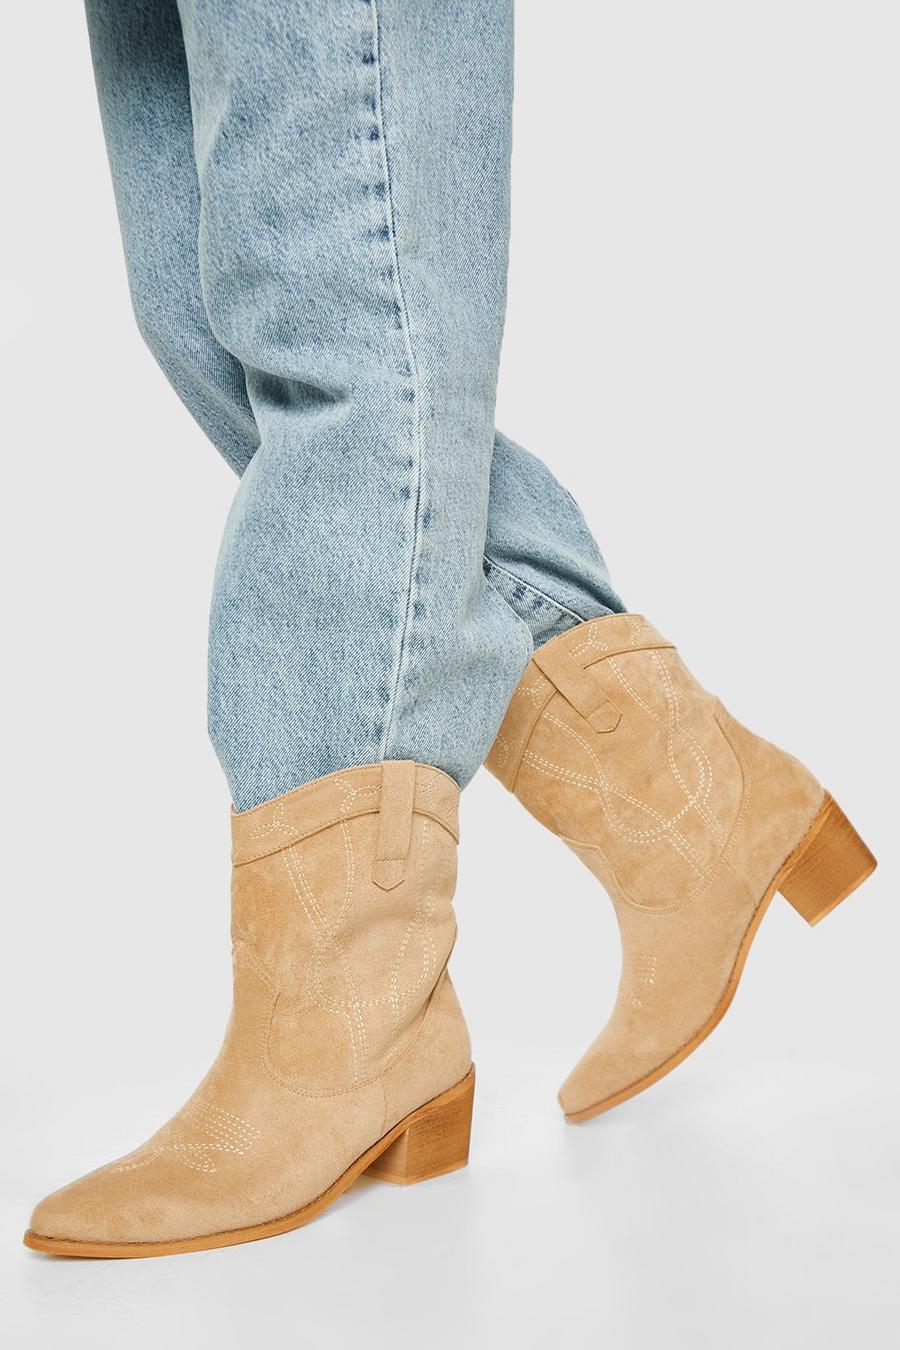 Tan Wide Fit Stitch Detail Ankle Western Cowboy Boots